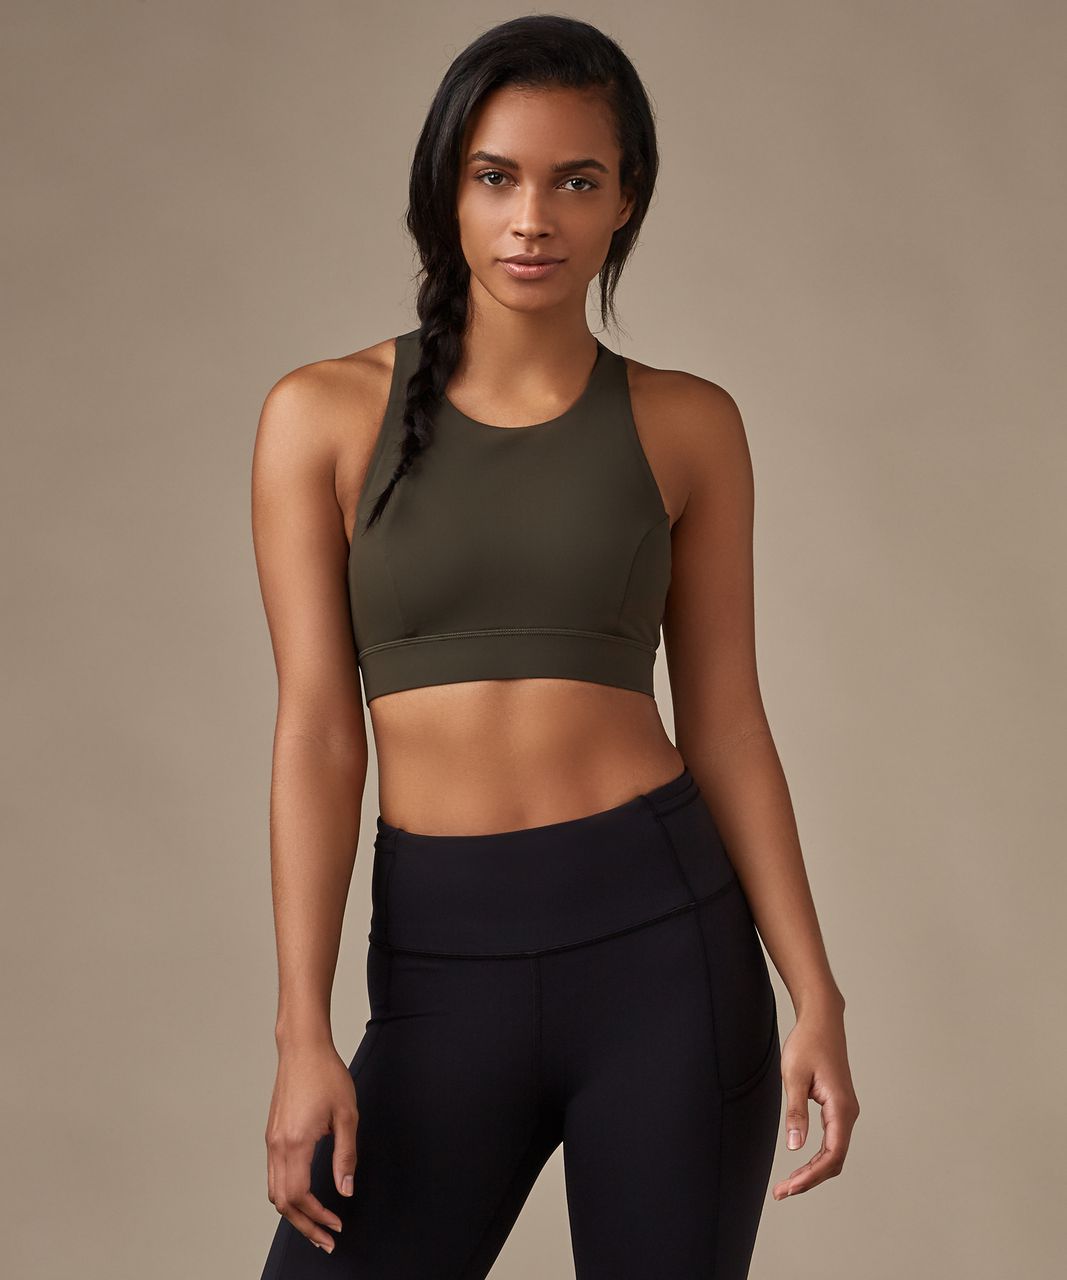 WTs 23” in dark olive, Align Reversible Bra in white/wafsnb and